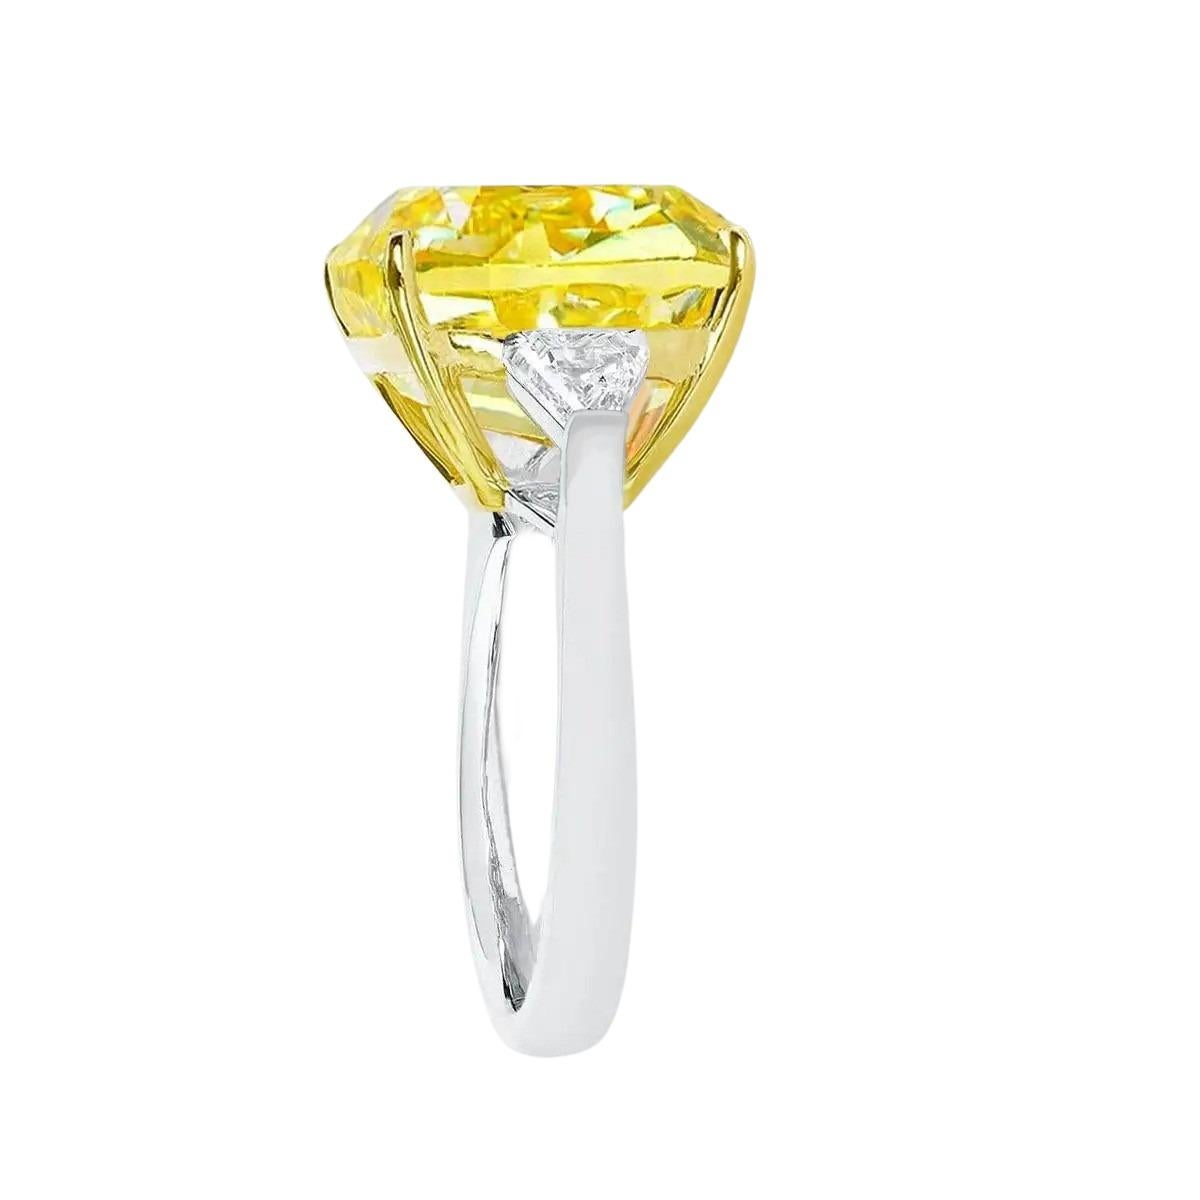 Exquisite solitaire fancy  yellow cushion cut diamond with two sidetrillion cut diamonds and set in solid 18 carats yellow gold and 18 carats white gold. The main stone offers an eye clean appearance, fantastic sparkle, and a unique and glamorous